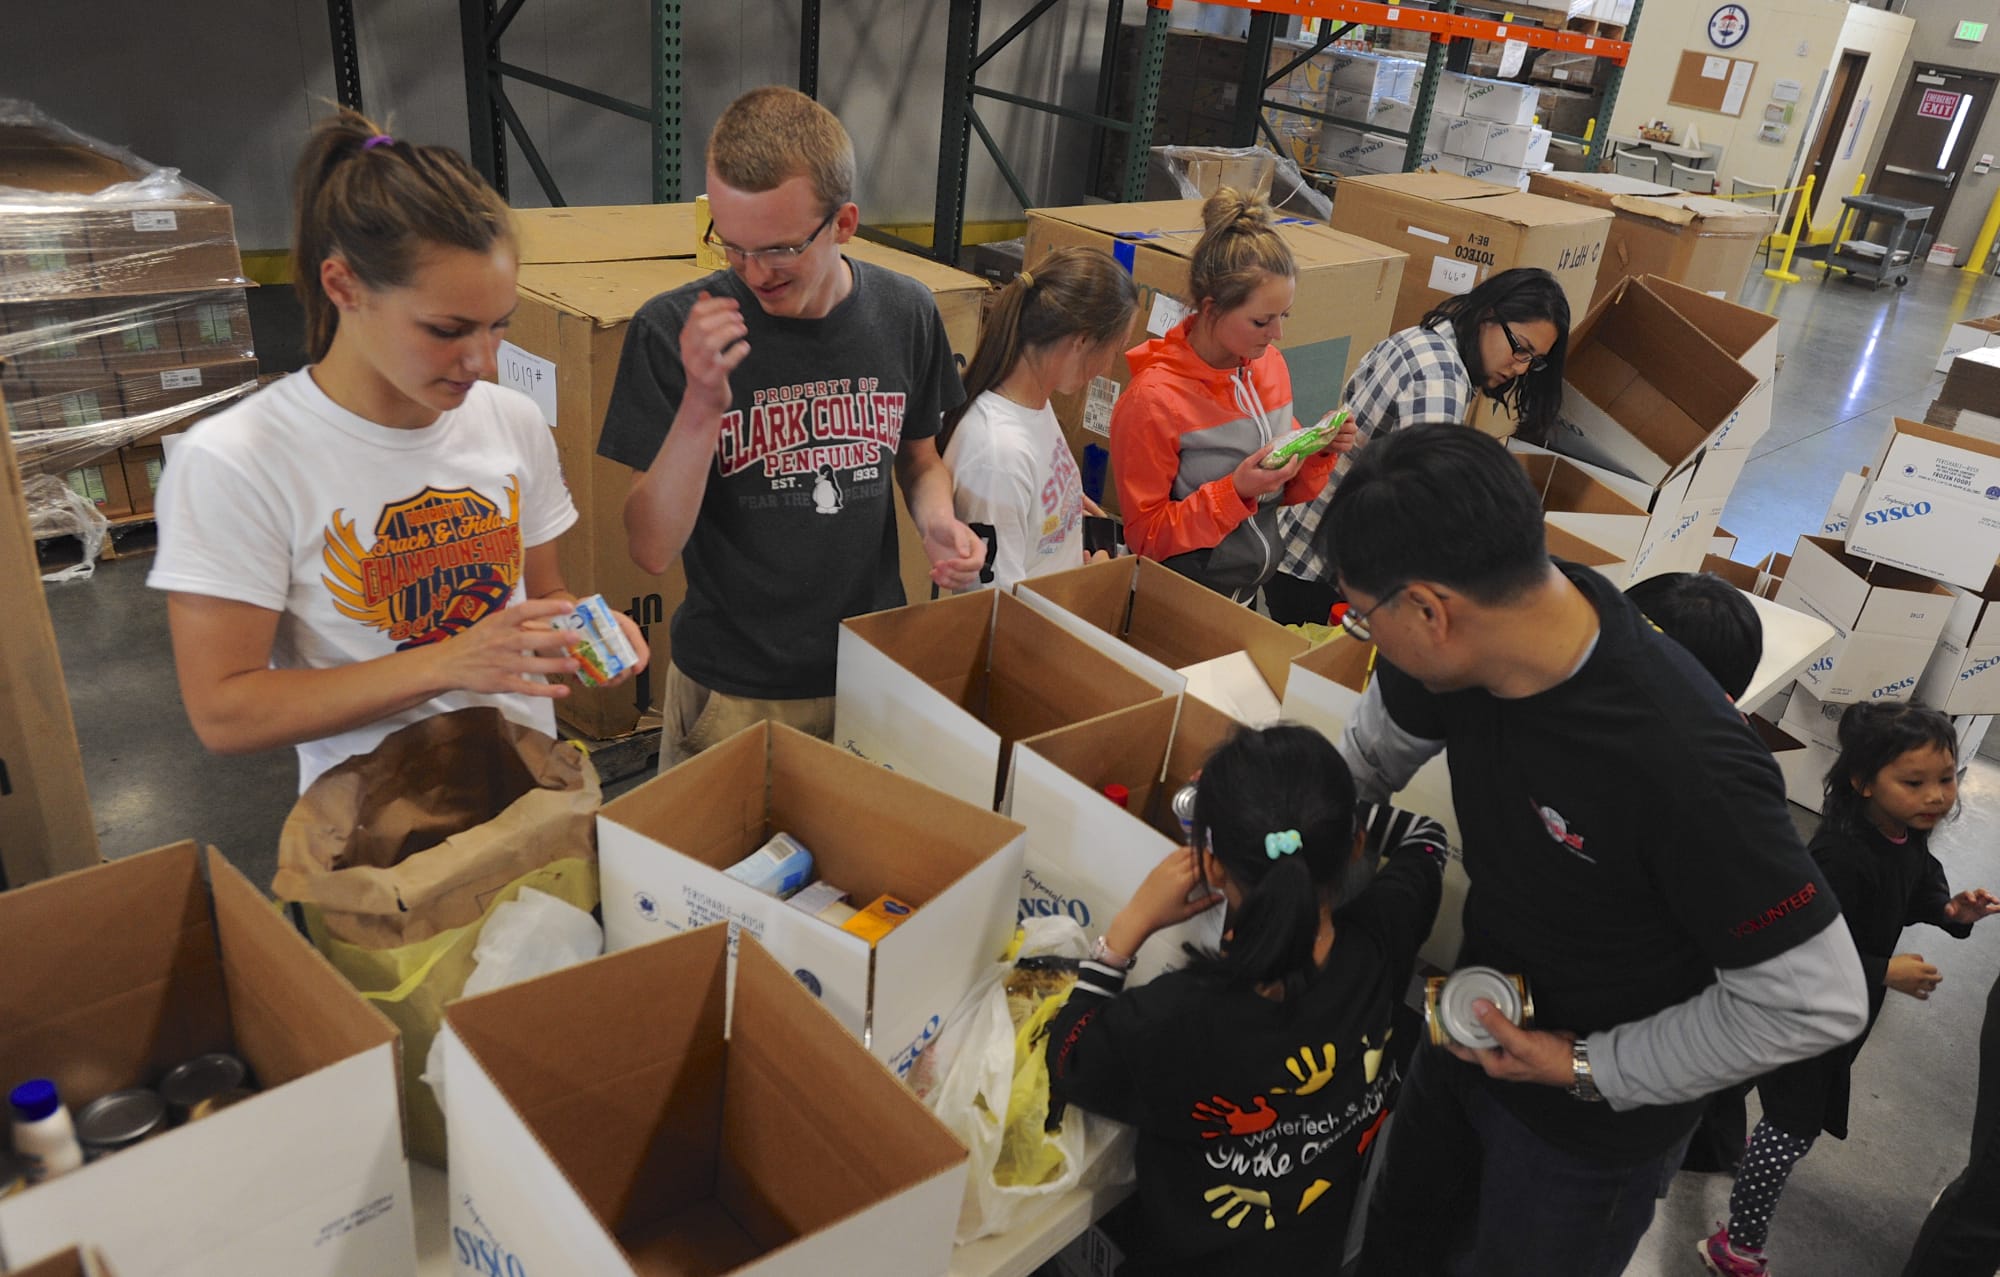 Volunteers, from left, Ellery Roberts, Michael Hall, Jennifer Ross, Megan Wilson and Esther Pisano sort food donations at a regular Tuesday night repack event at the Clark County Food Bank.